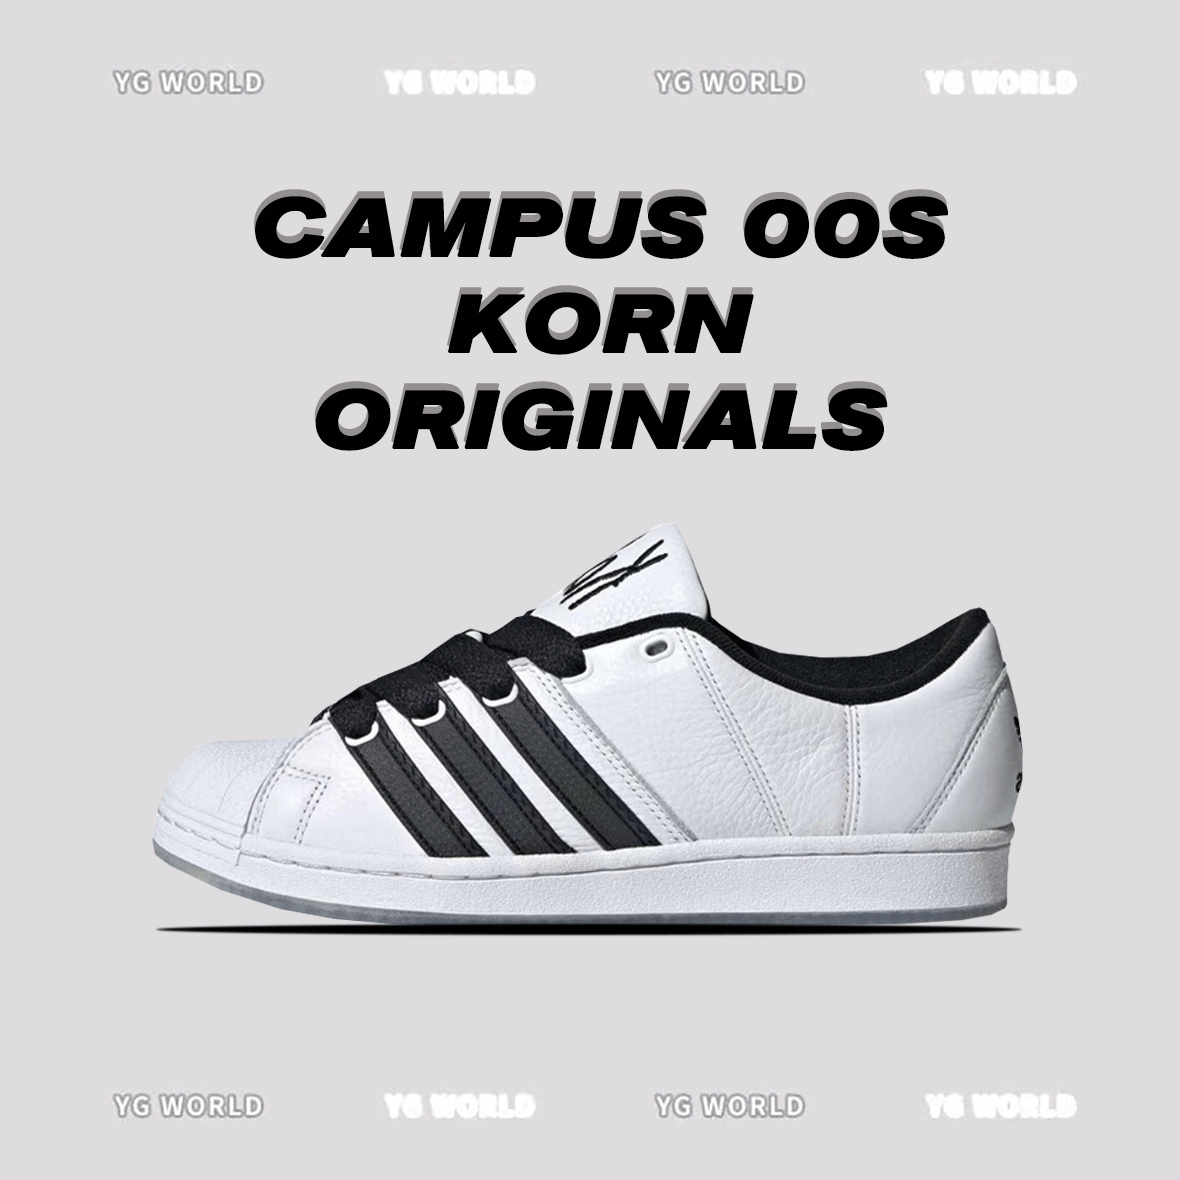 Item Thumbnail for "YG&AD" 🍞 bread shoes Xinkeng Korn co-branded Campus 00s originals☘classic trend comfortable and versatile couple retro low-top sneakers shock-absorbing wear-resistant unisex casual shoes Oreo black and white IG0792 white and black IG0793 top pure original